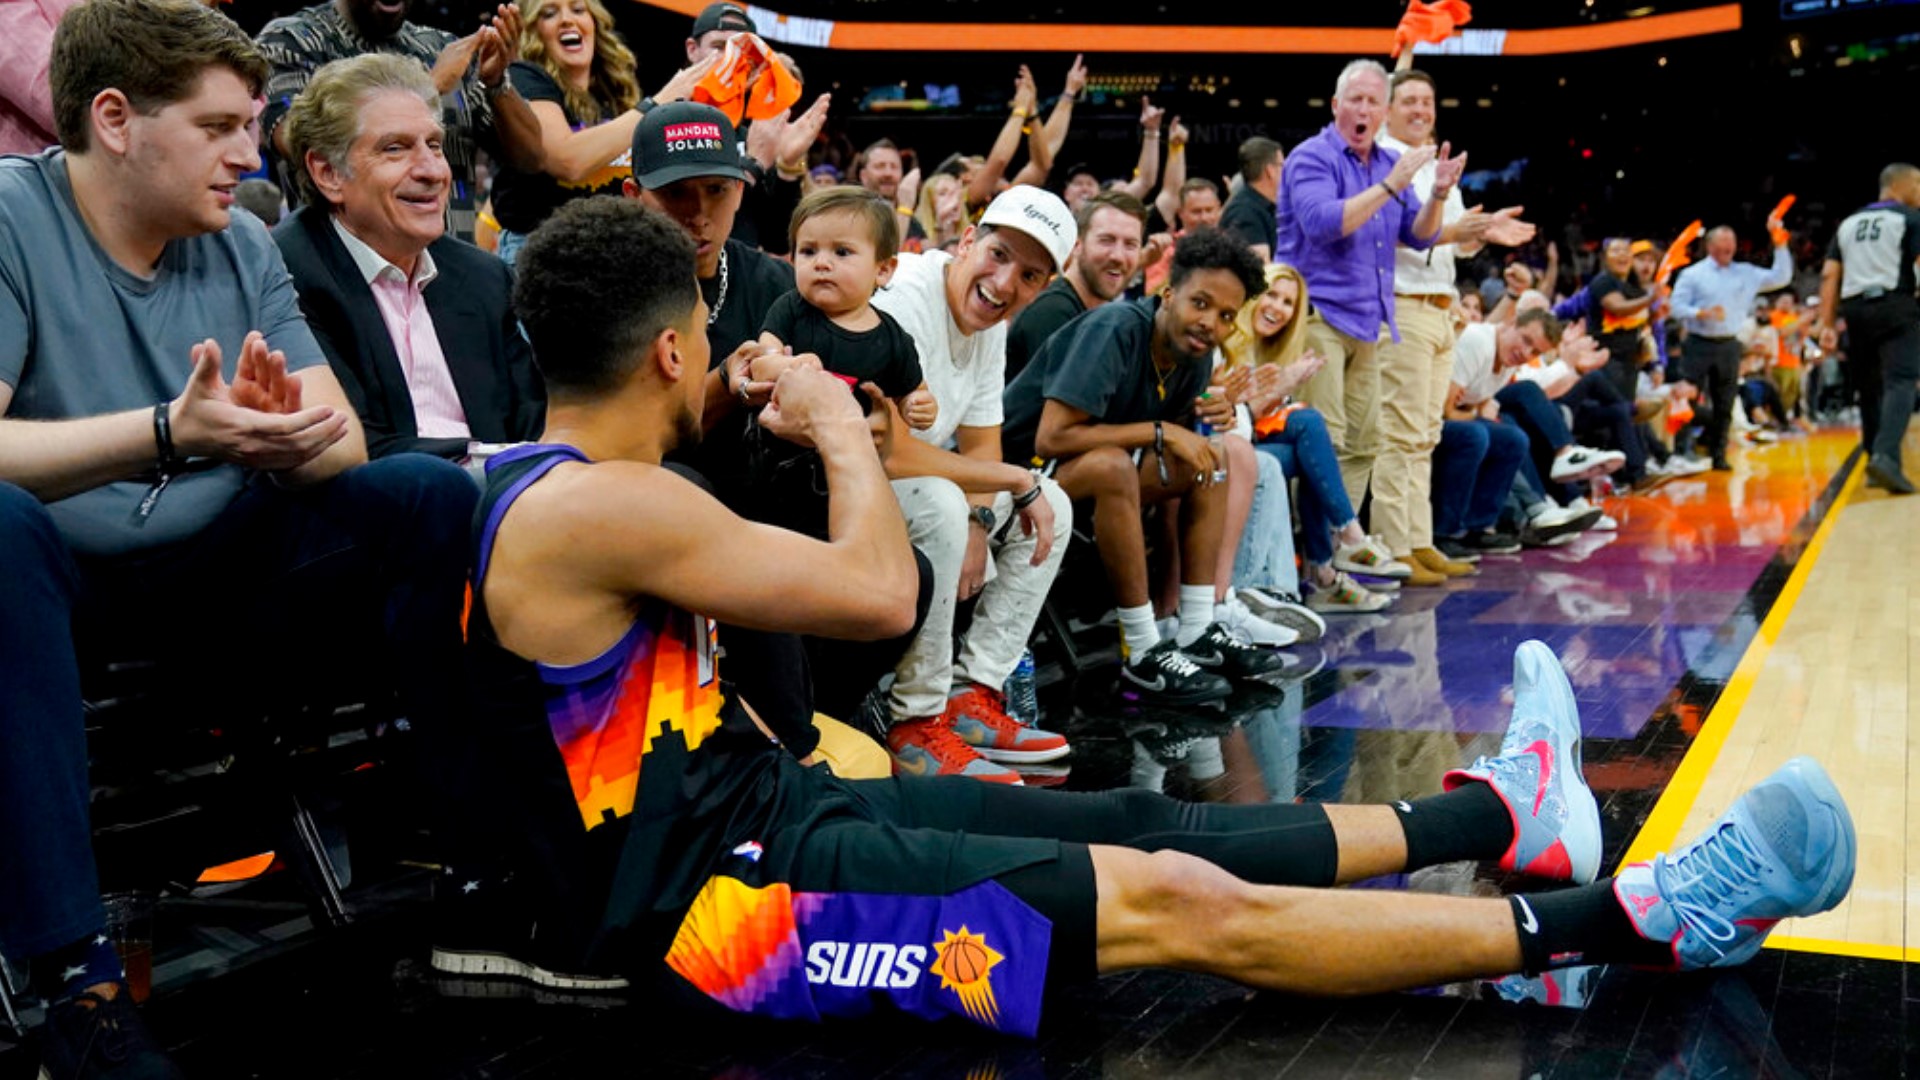 Say hi to Ozzy. He's the baby who dapped Devin Booker after a tough shot in Game 2 of the NBA Playoffs against the New Orleans Pelicans.